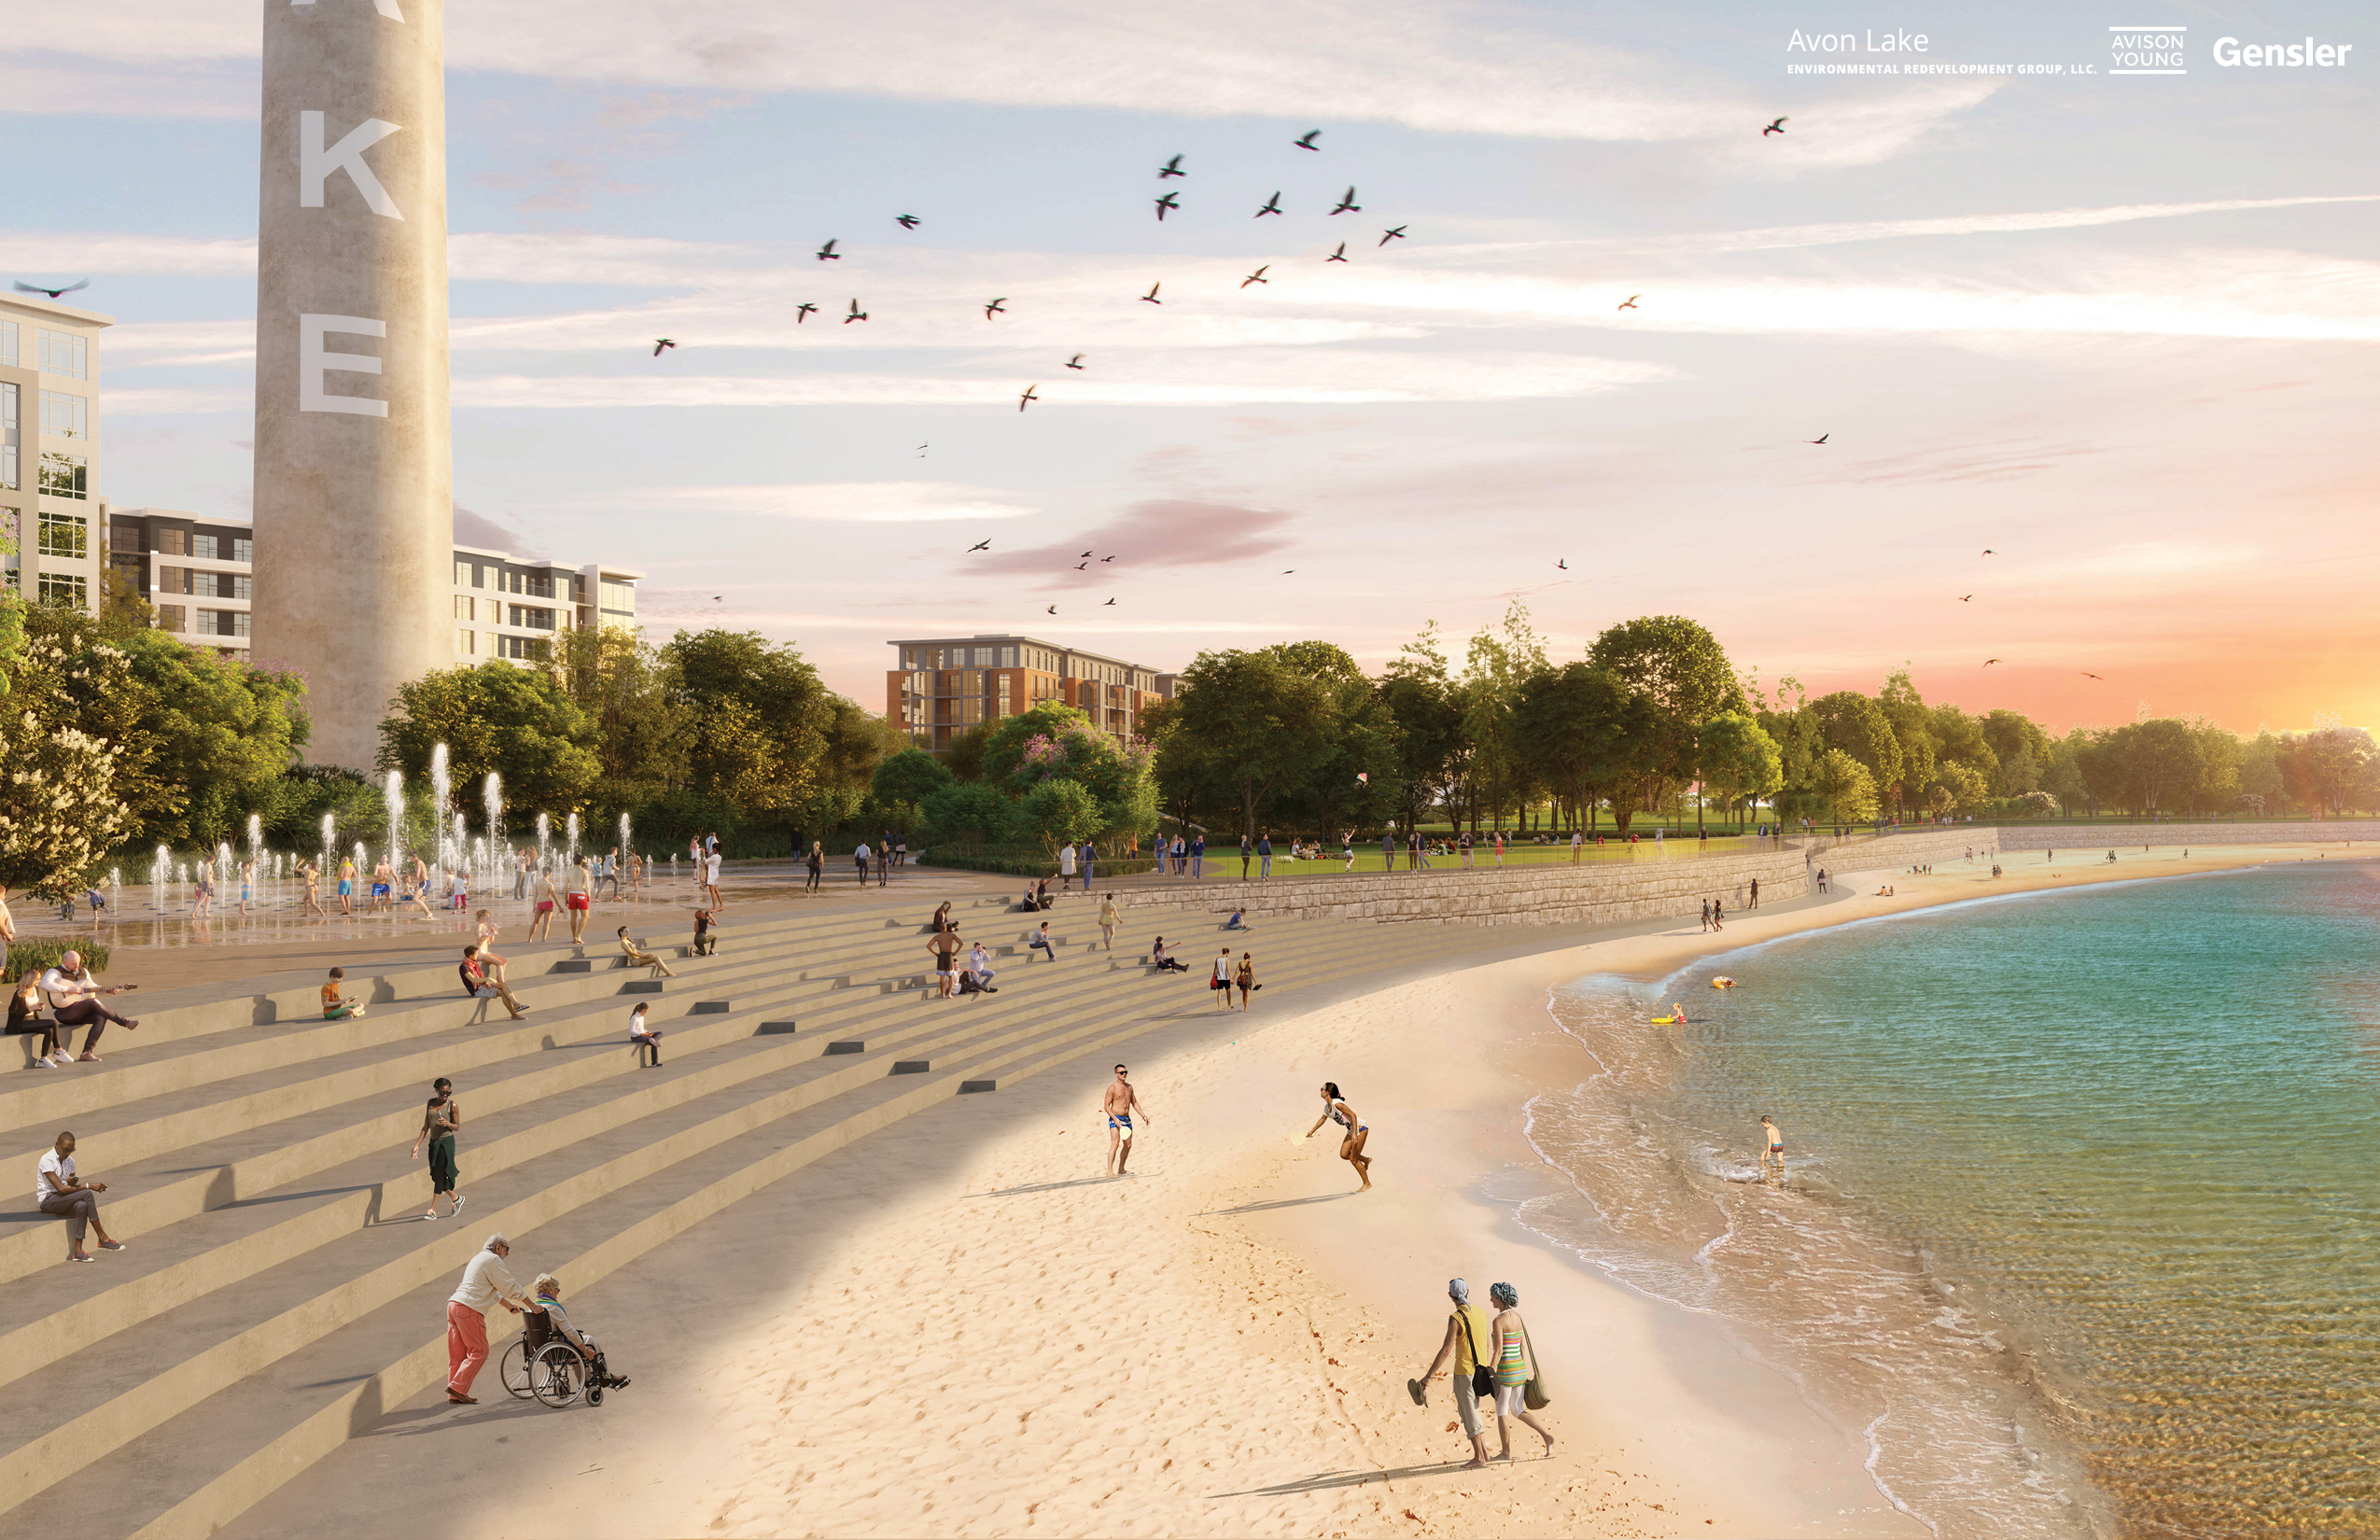 rendering of a beachfront area near a power plant